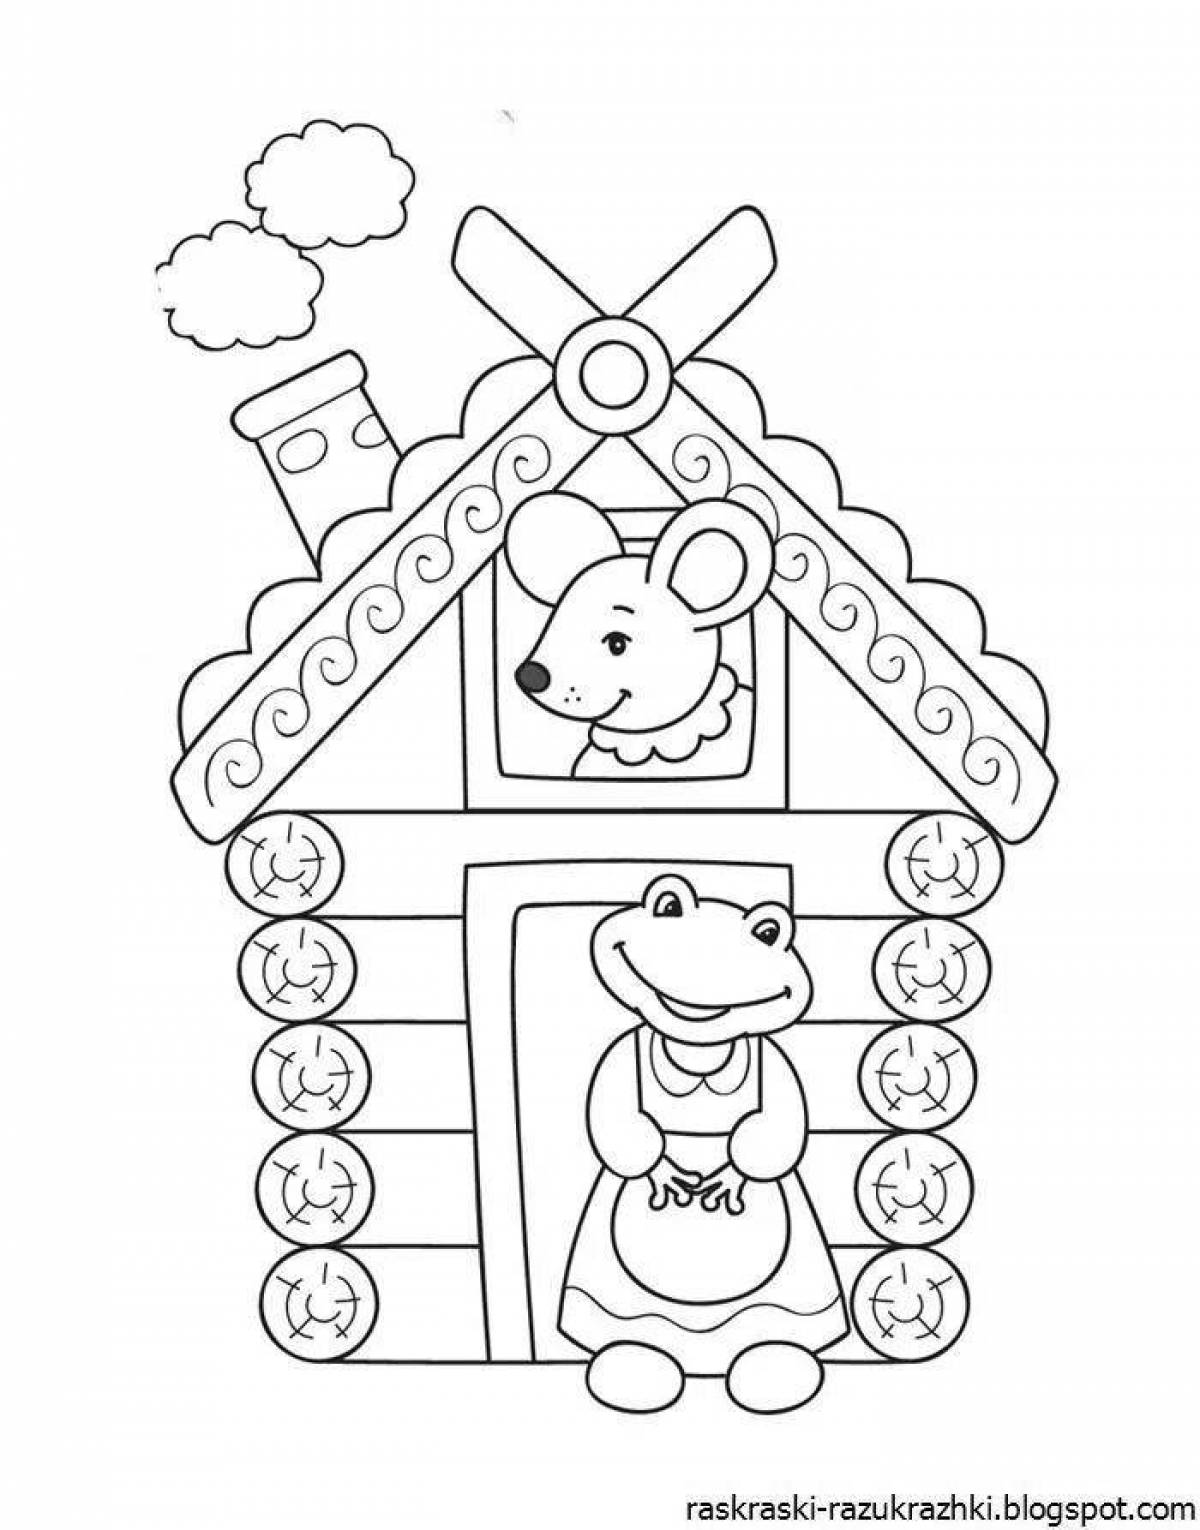 Charming teremok coloring book for children 6-7 years old